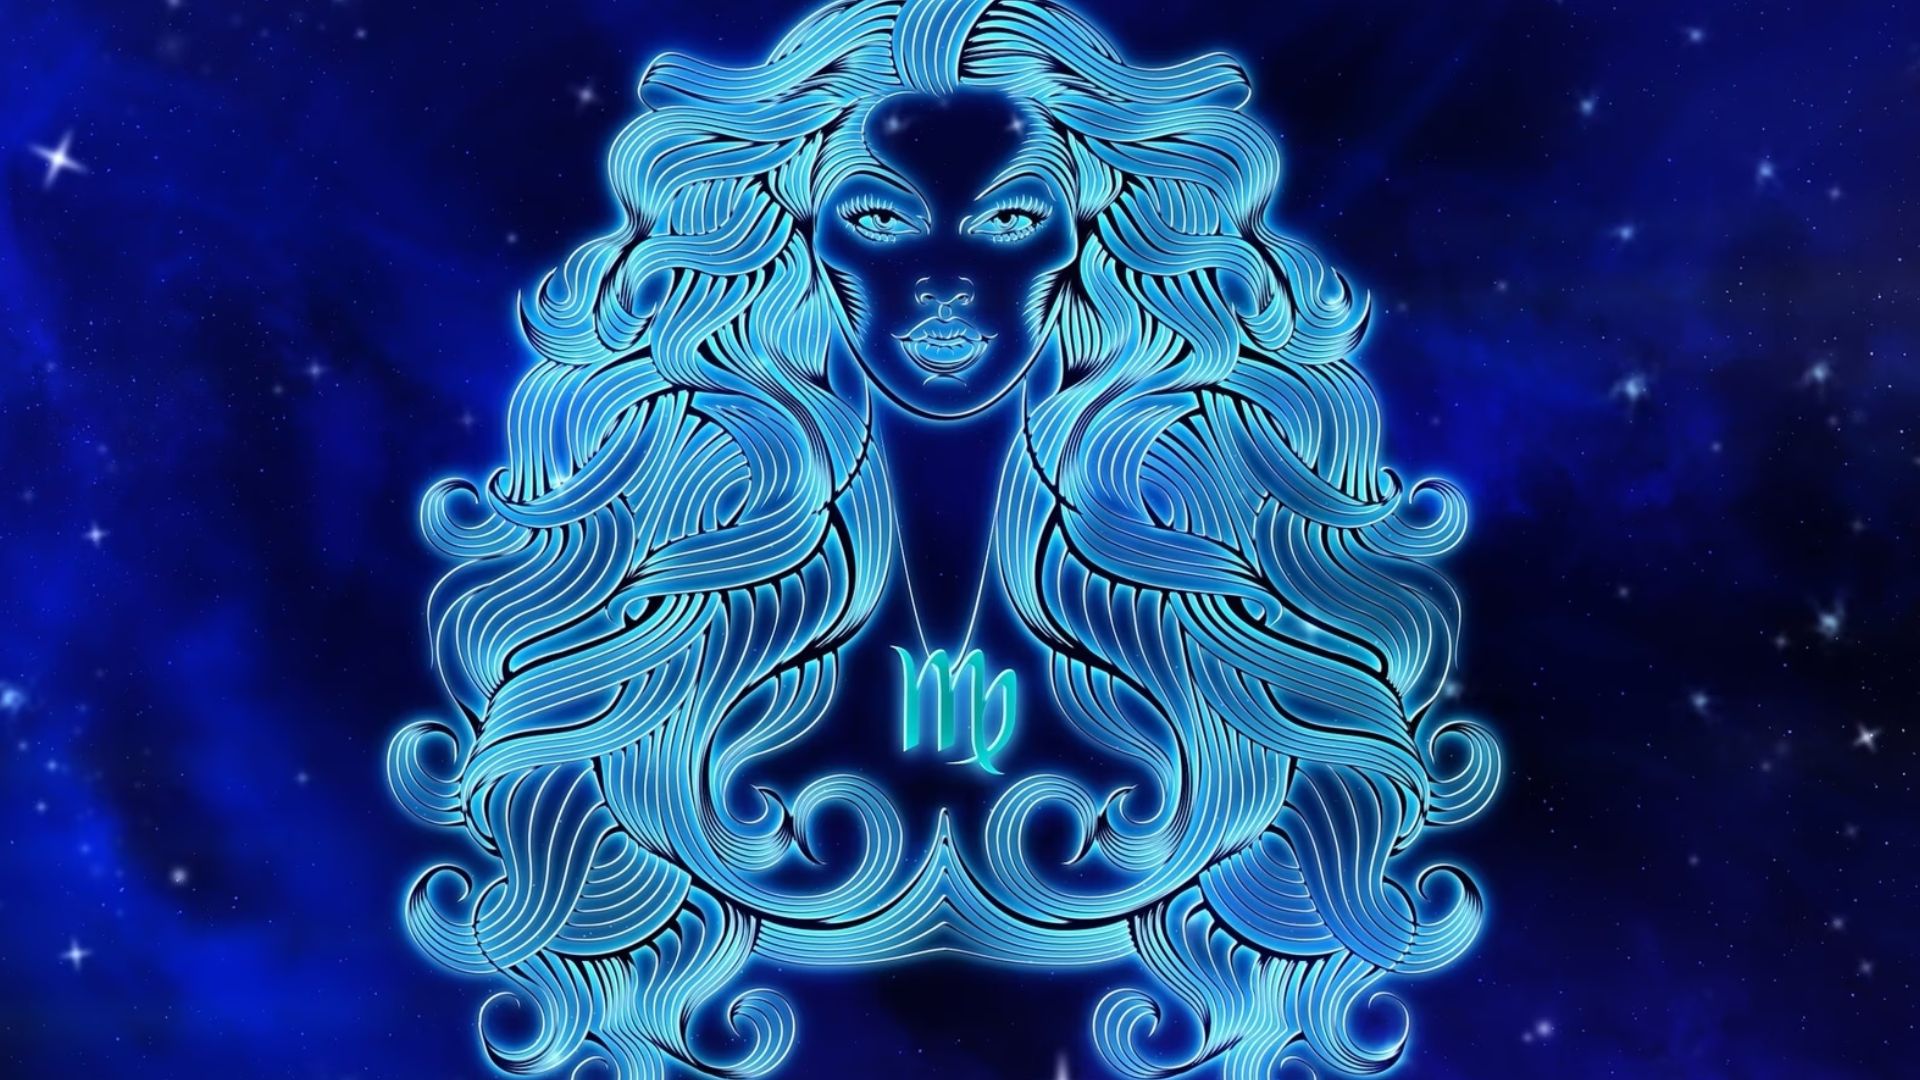 Blue Lady With Long Hairs